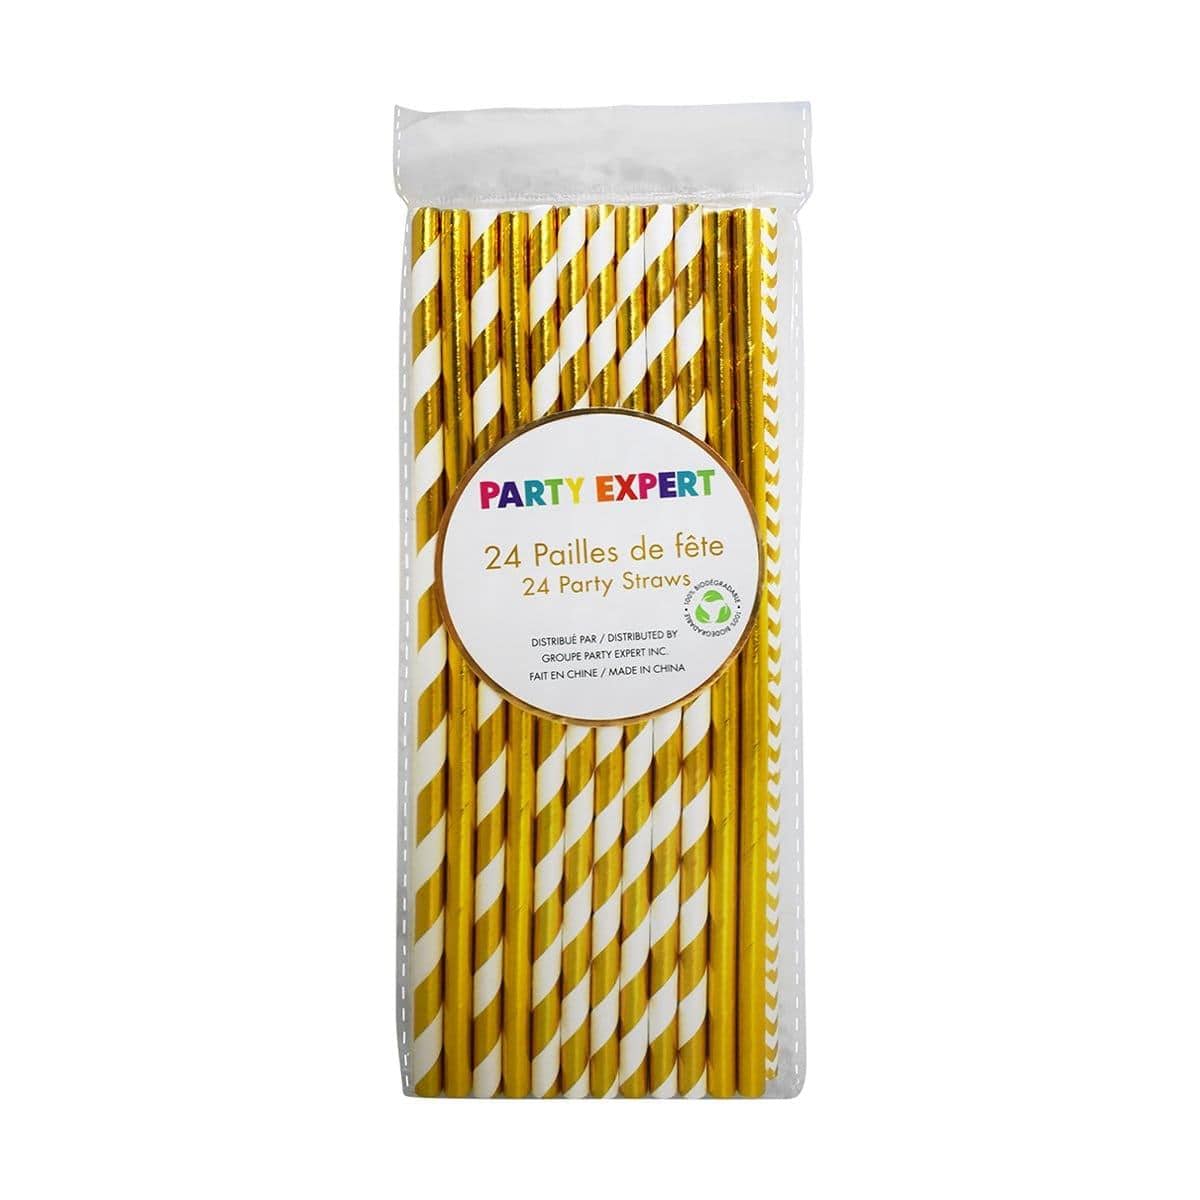 Buy Everyday Entertaining Paper Straws - Gold And White -24/Pk sold at Party Expert